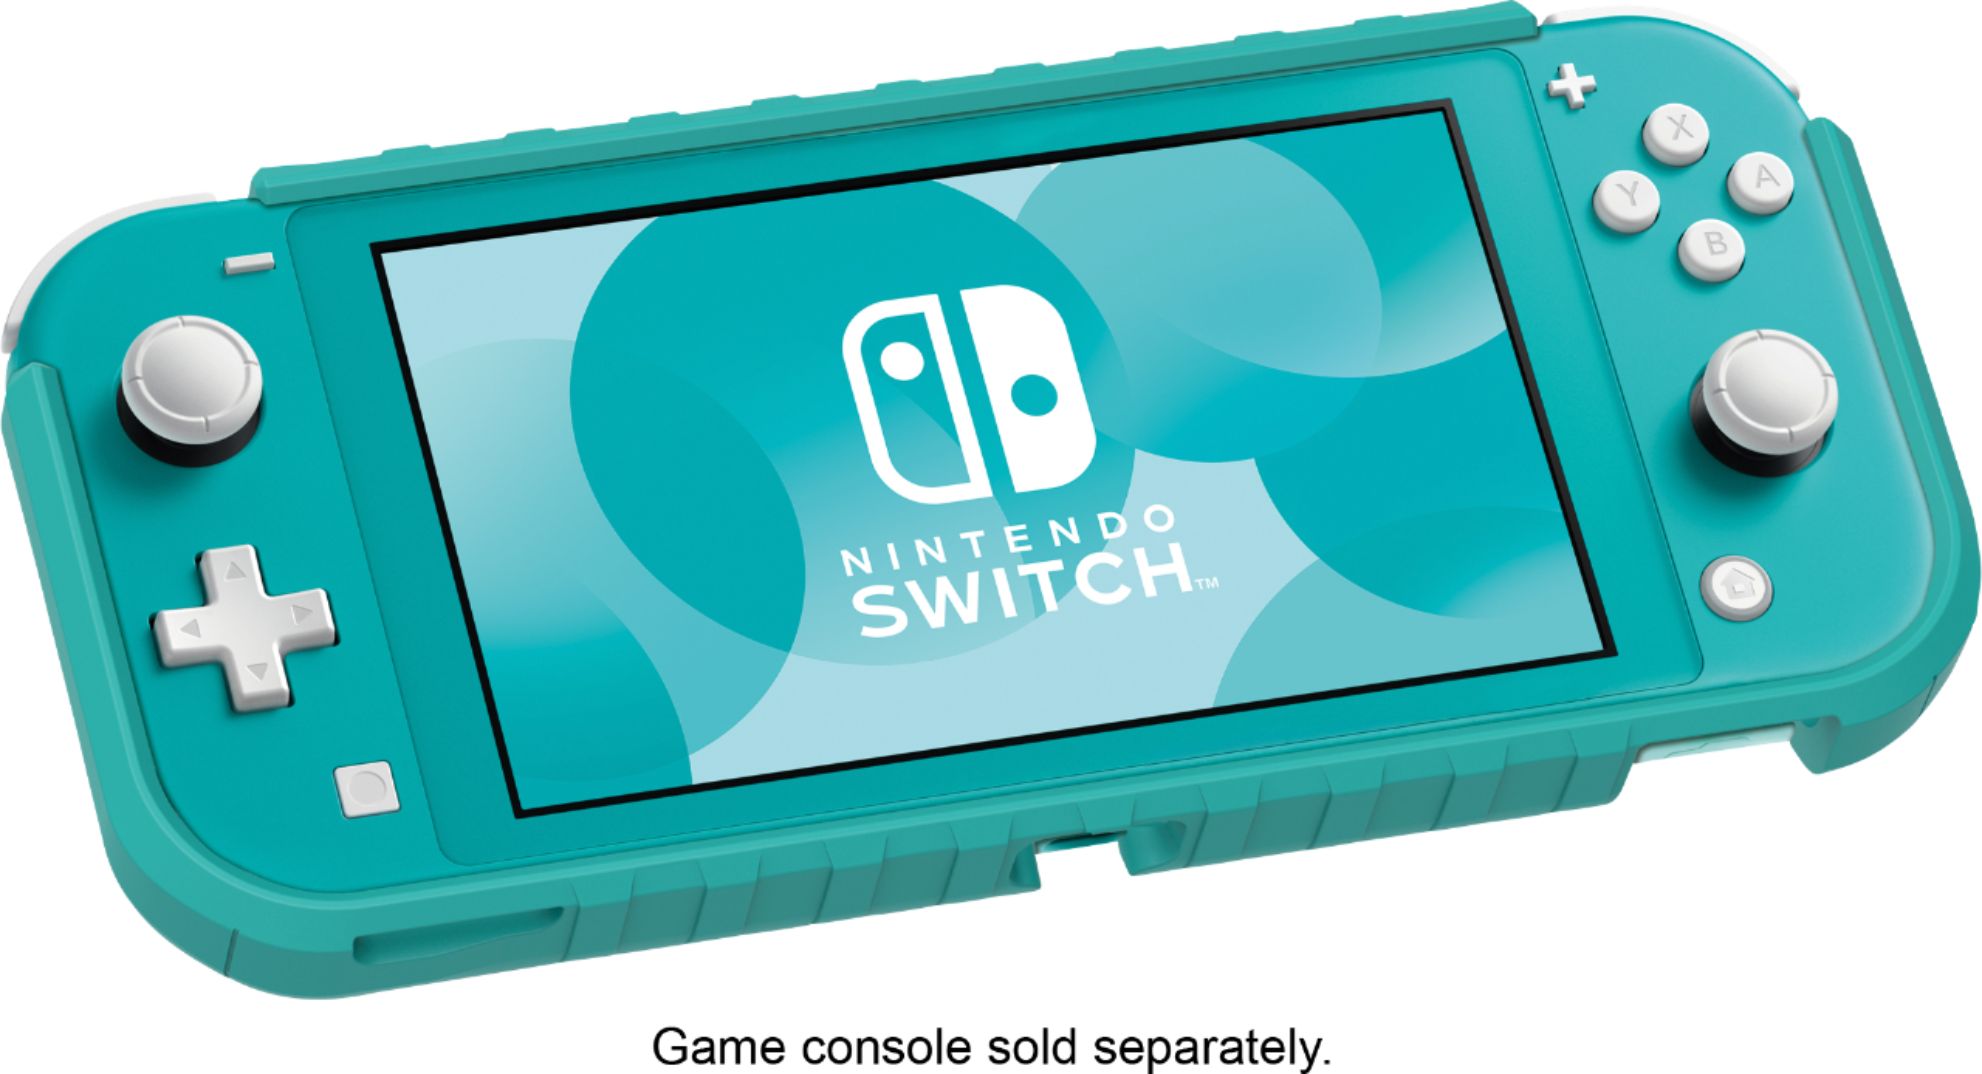 Nintendo Switch Lite Console Turquoise Portable Game Machine from